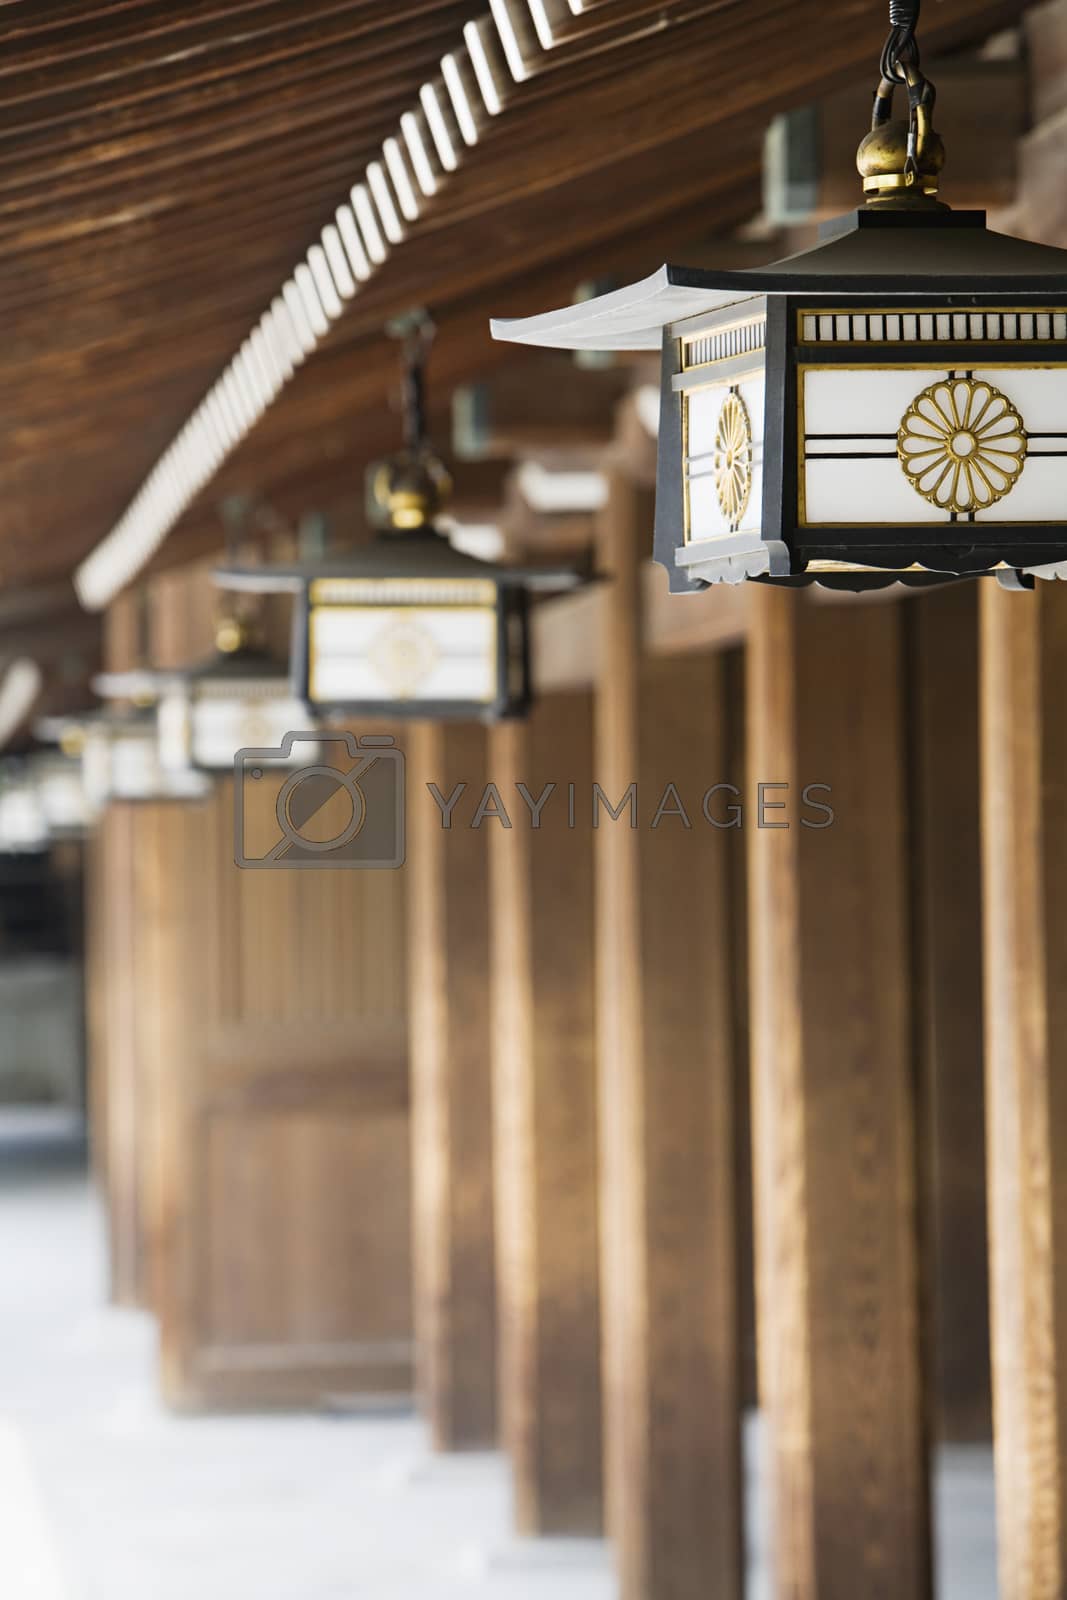 Royalty free image of Lanterns Hanging From Eaves at Meiji Shrine by moodboard